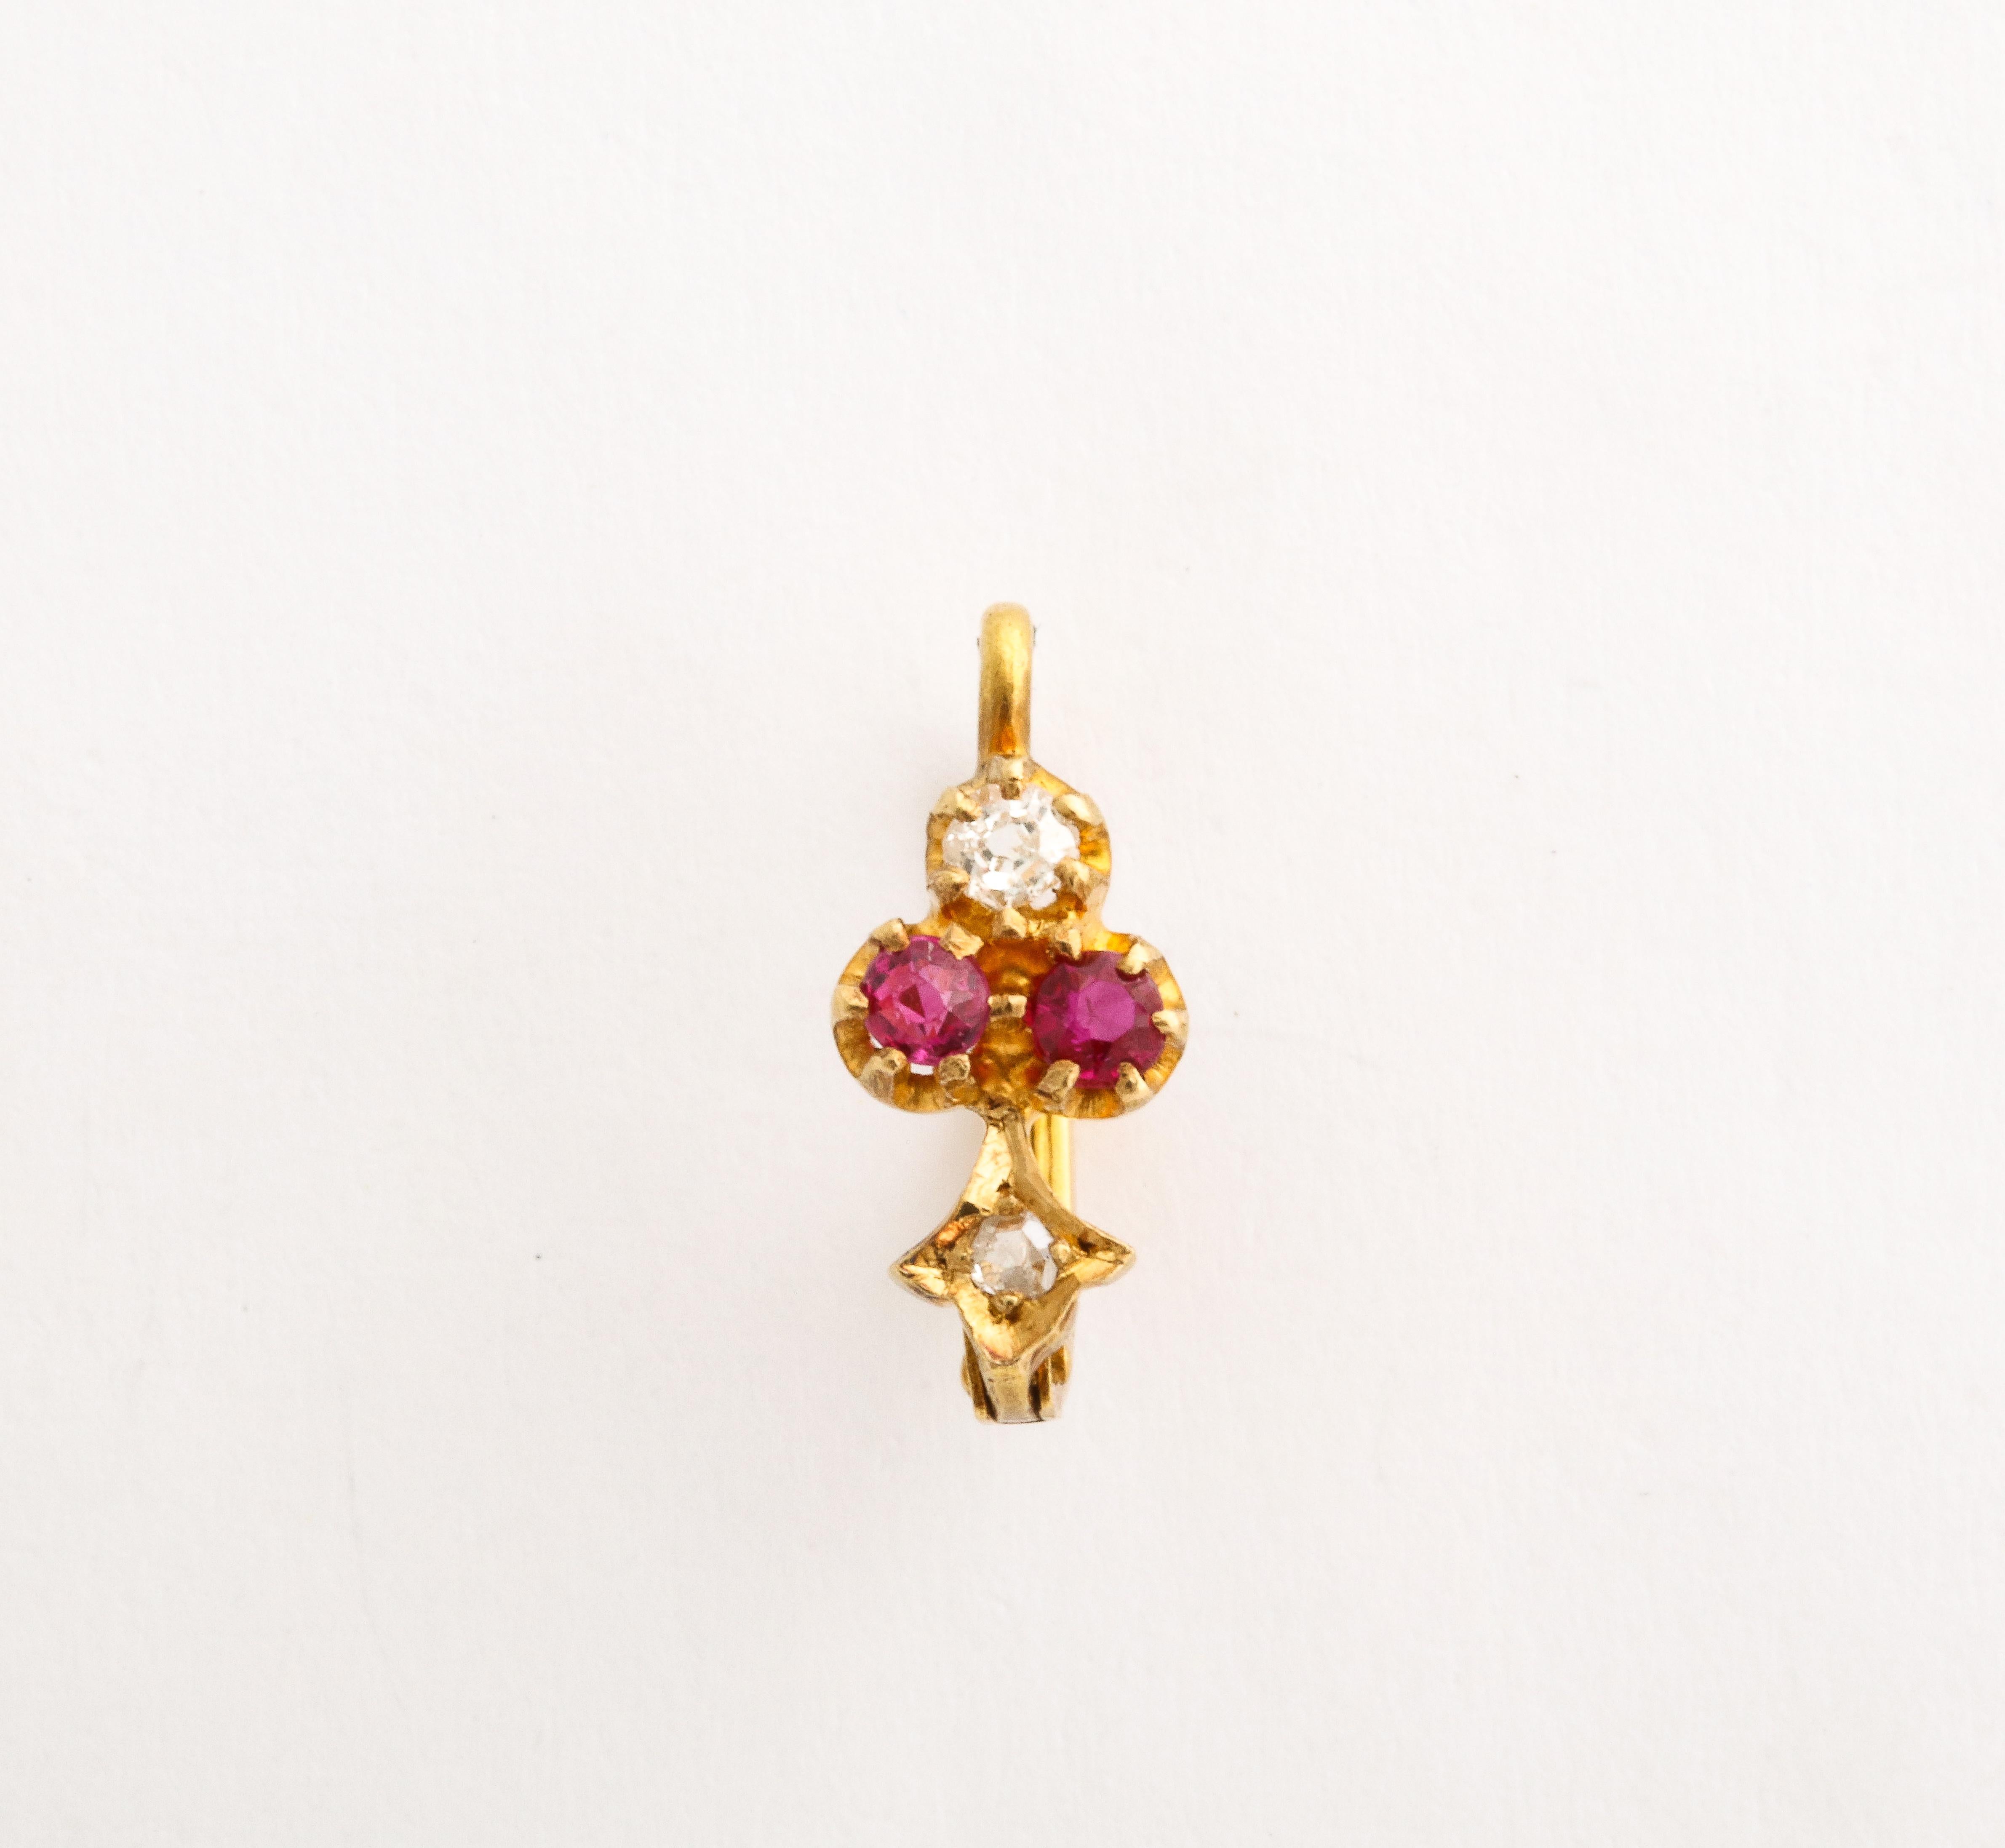 Irresistible, versatile, tiny and precious makes these Ruby and Diamond Earrings for every man or woman. They are 18kt gold with one single cut and one Old Mine Cut diamond and two rose cut diamonds. Four round rubies are central. Earrings are worn